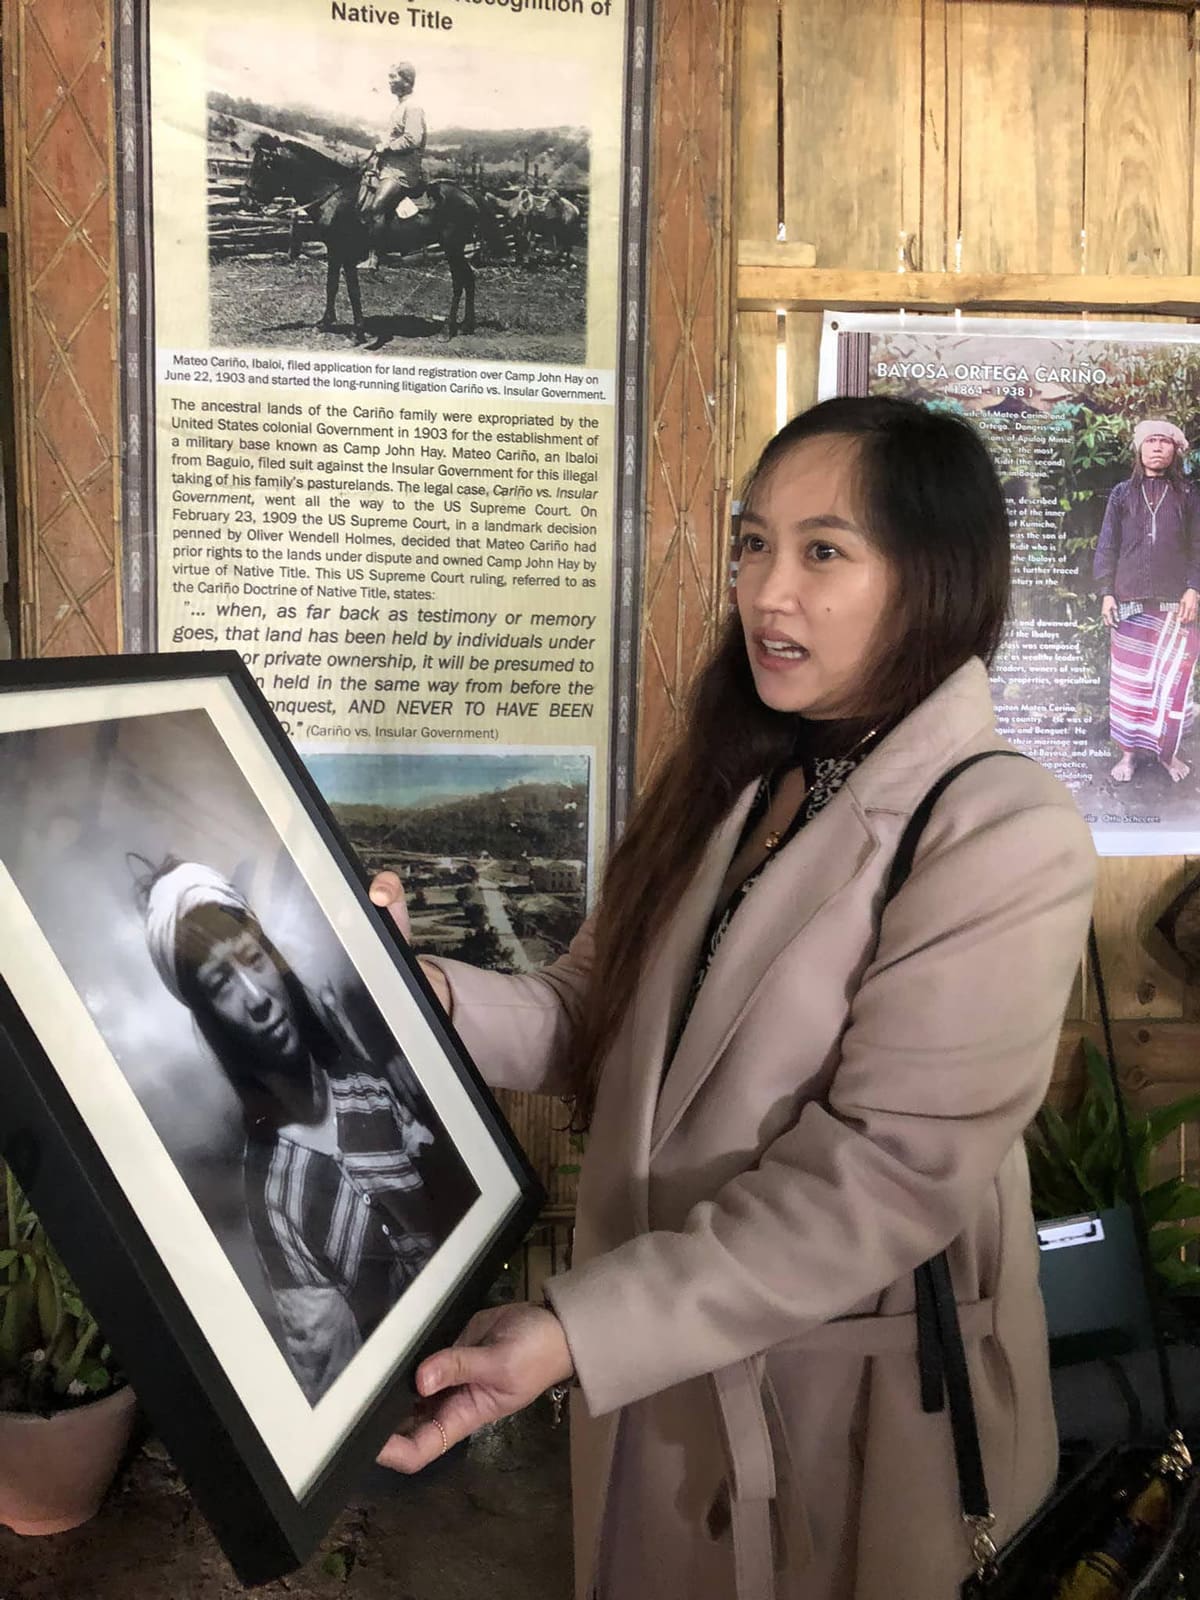 A woman holding a framed photograph from the past.